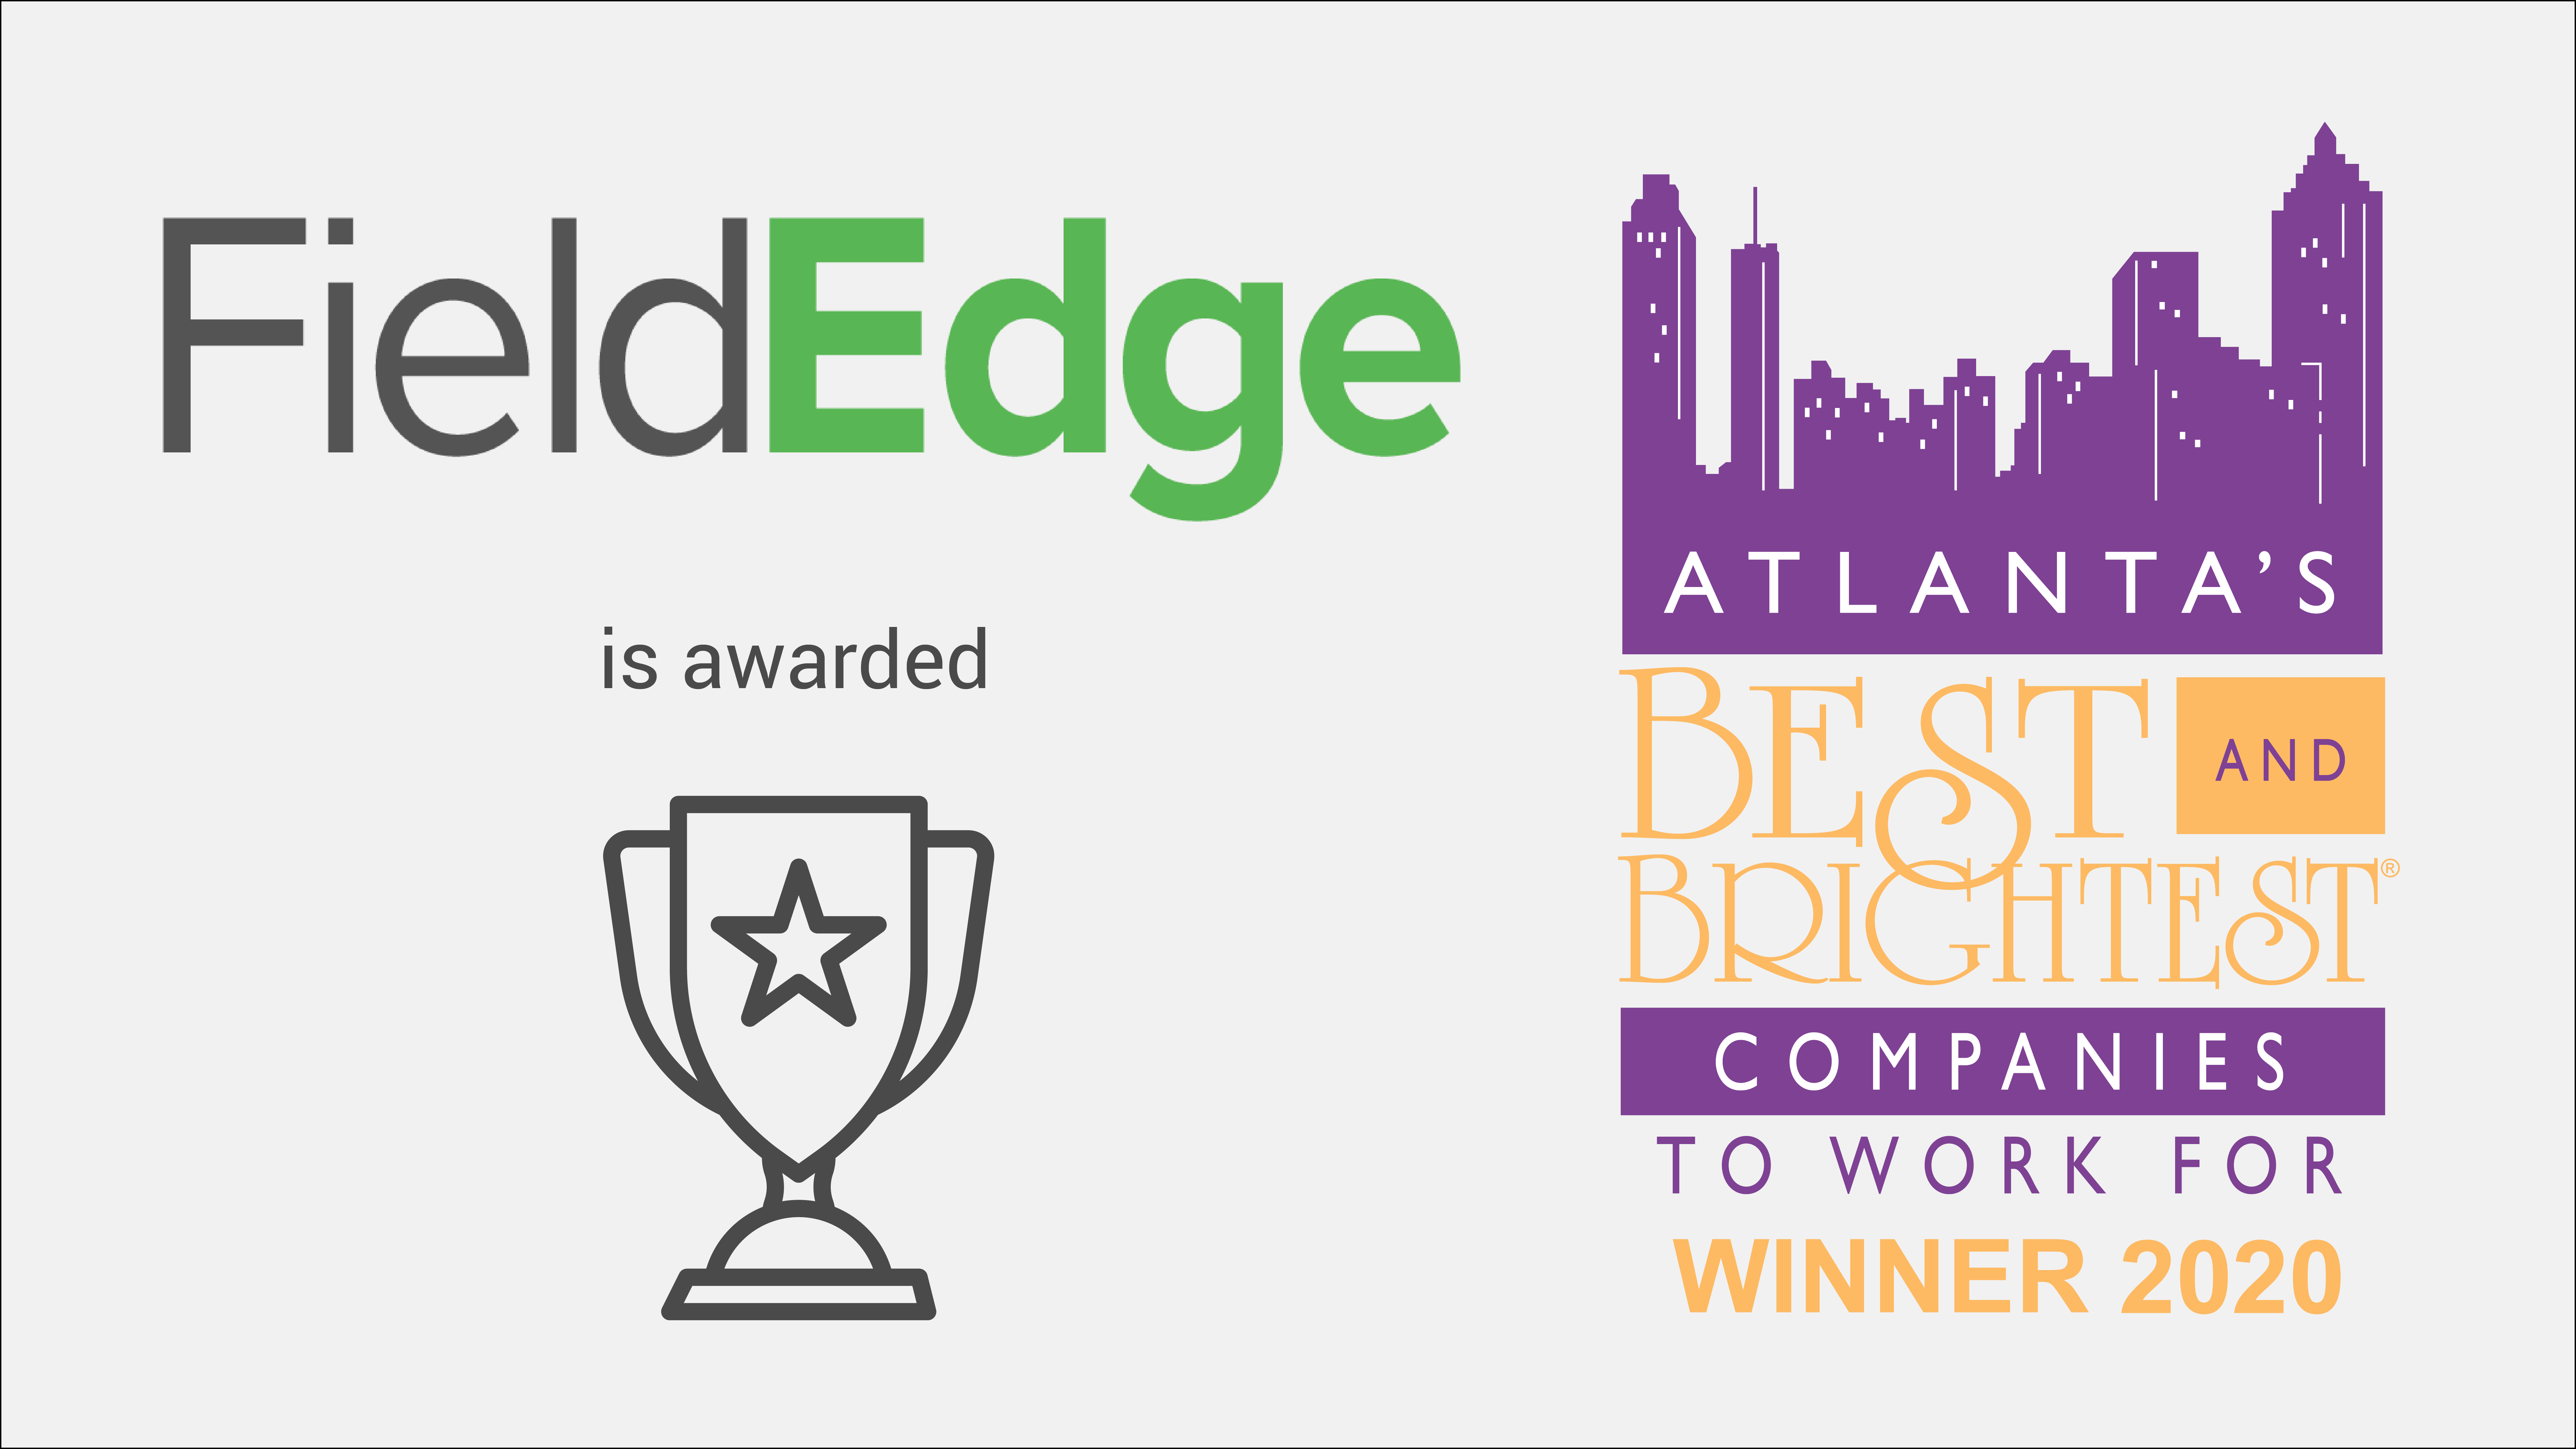 fieldedge best and brightest companies